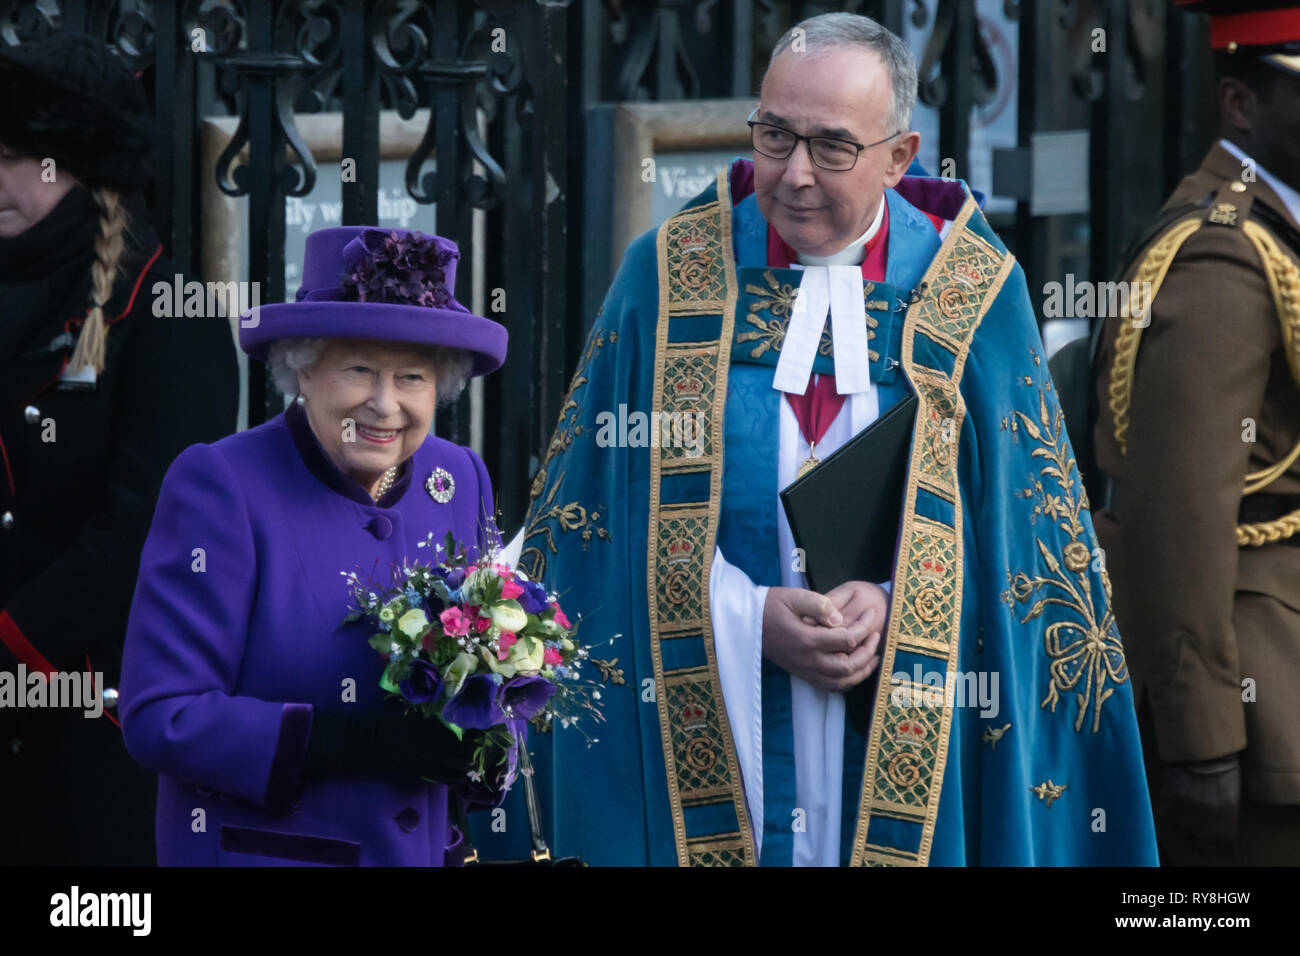 Her Majesty, Queen Elizabeth II stands alongside John Hall, Dean of Westminster following a service for Commonwealth Day at Westminster Abbey Stock Photo